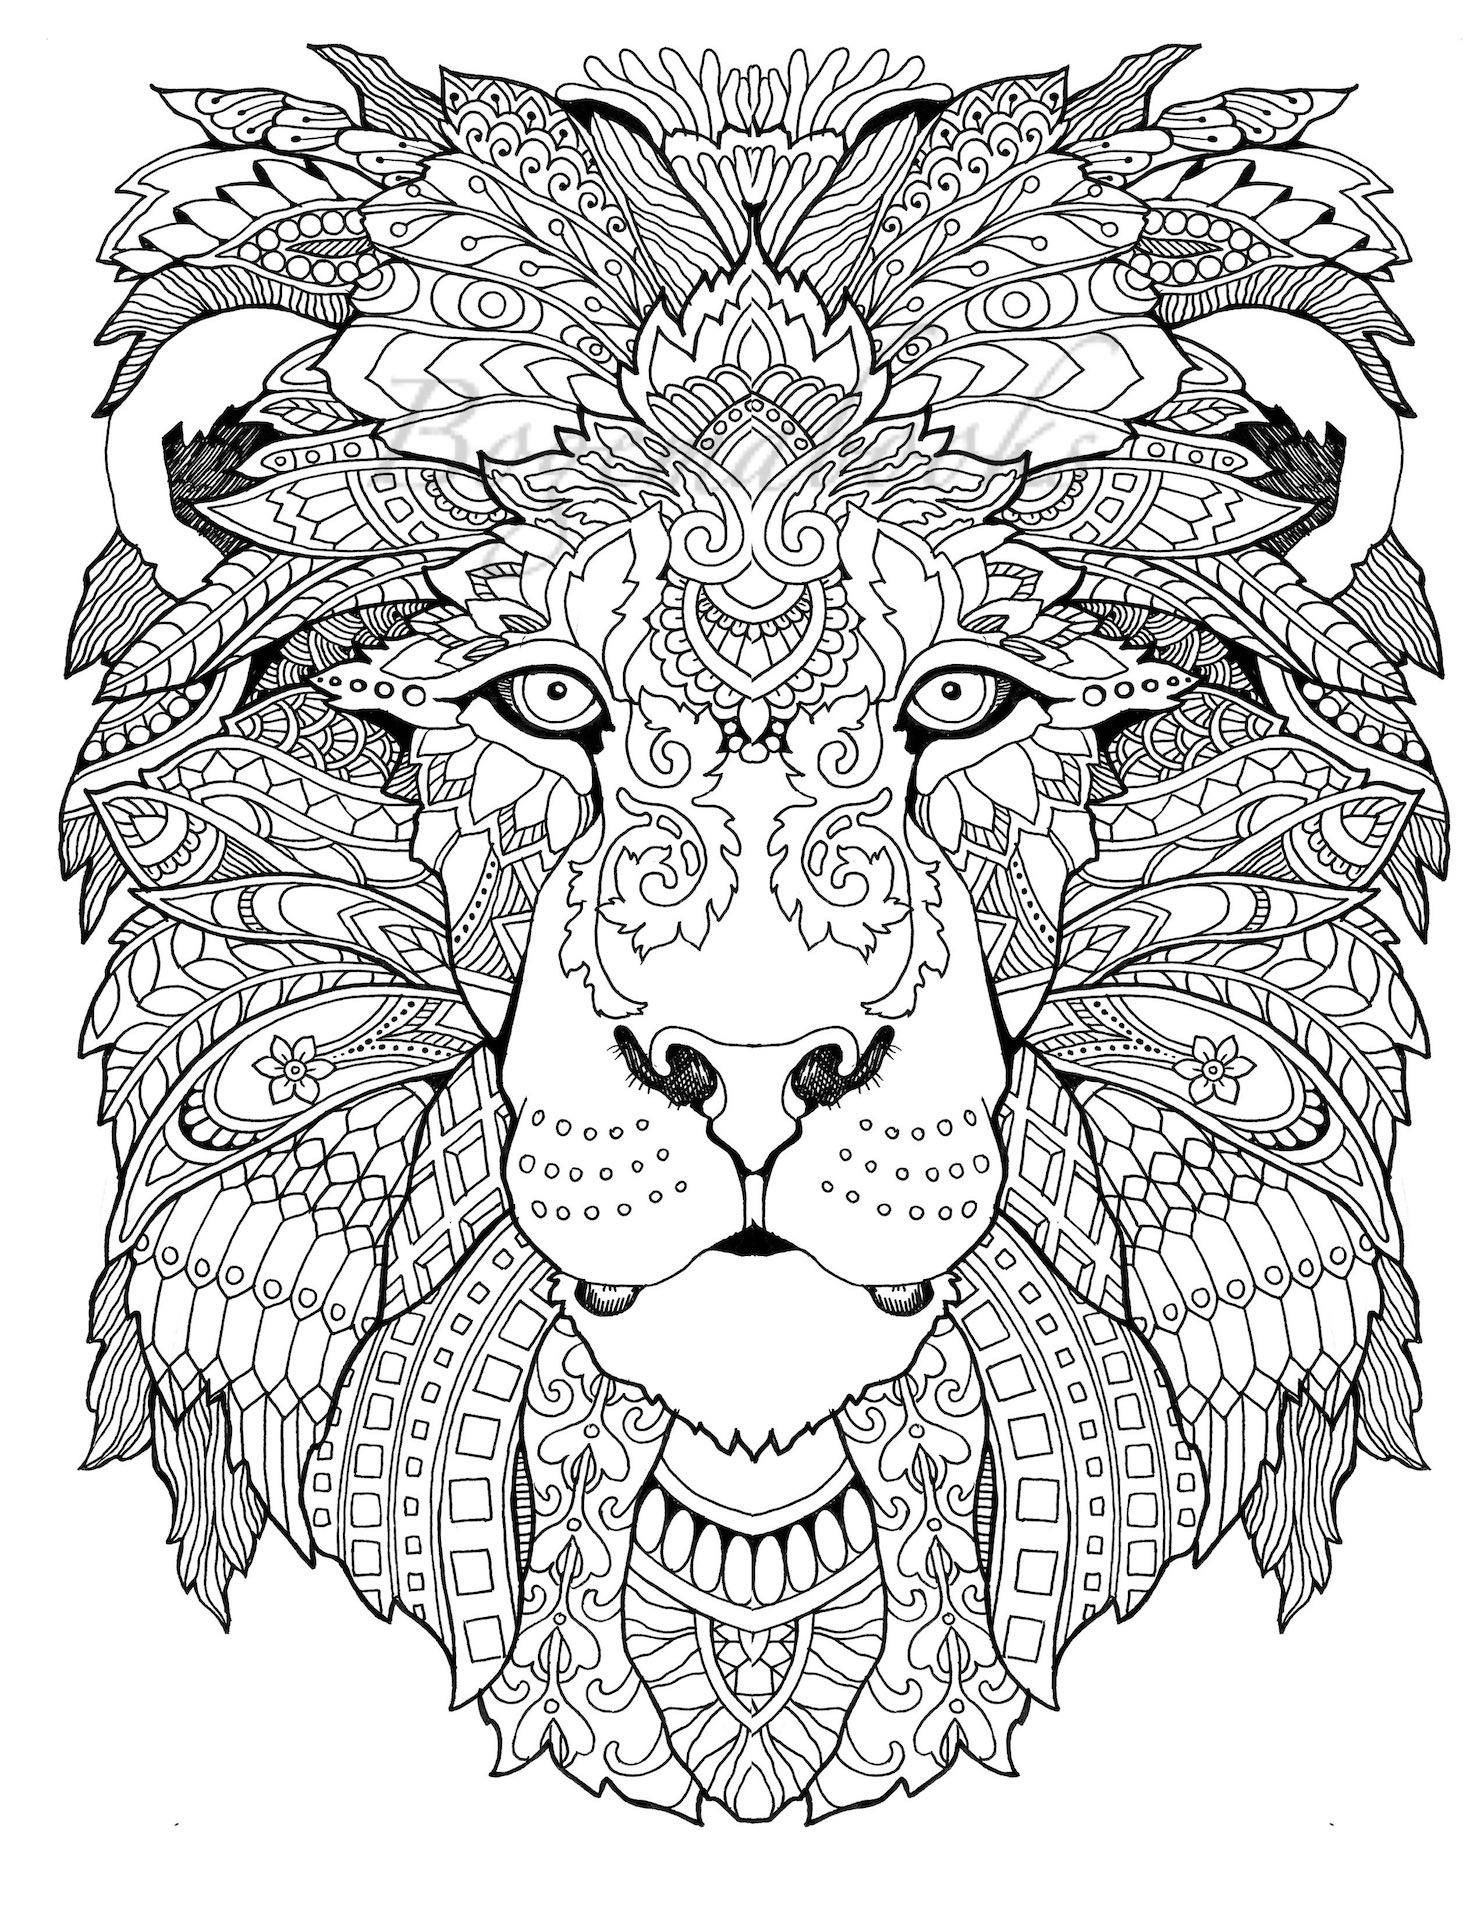 Download Coloring ~ Coloring Free Printable Pages For Adults Pdf ...